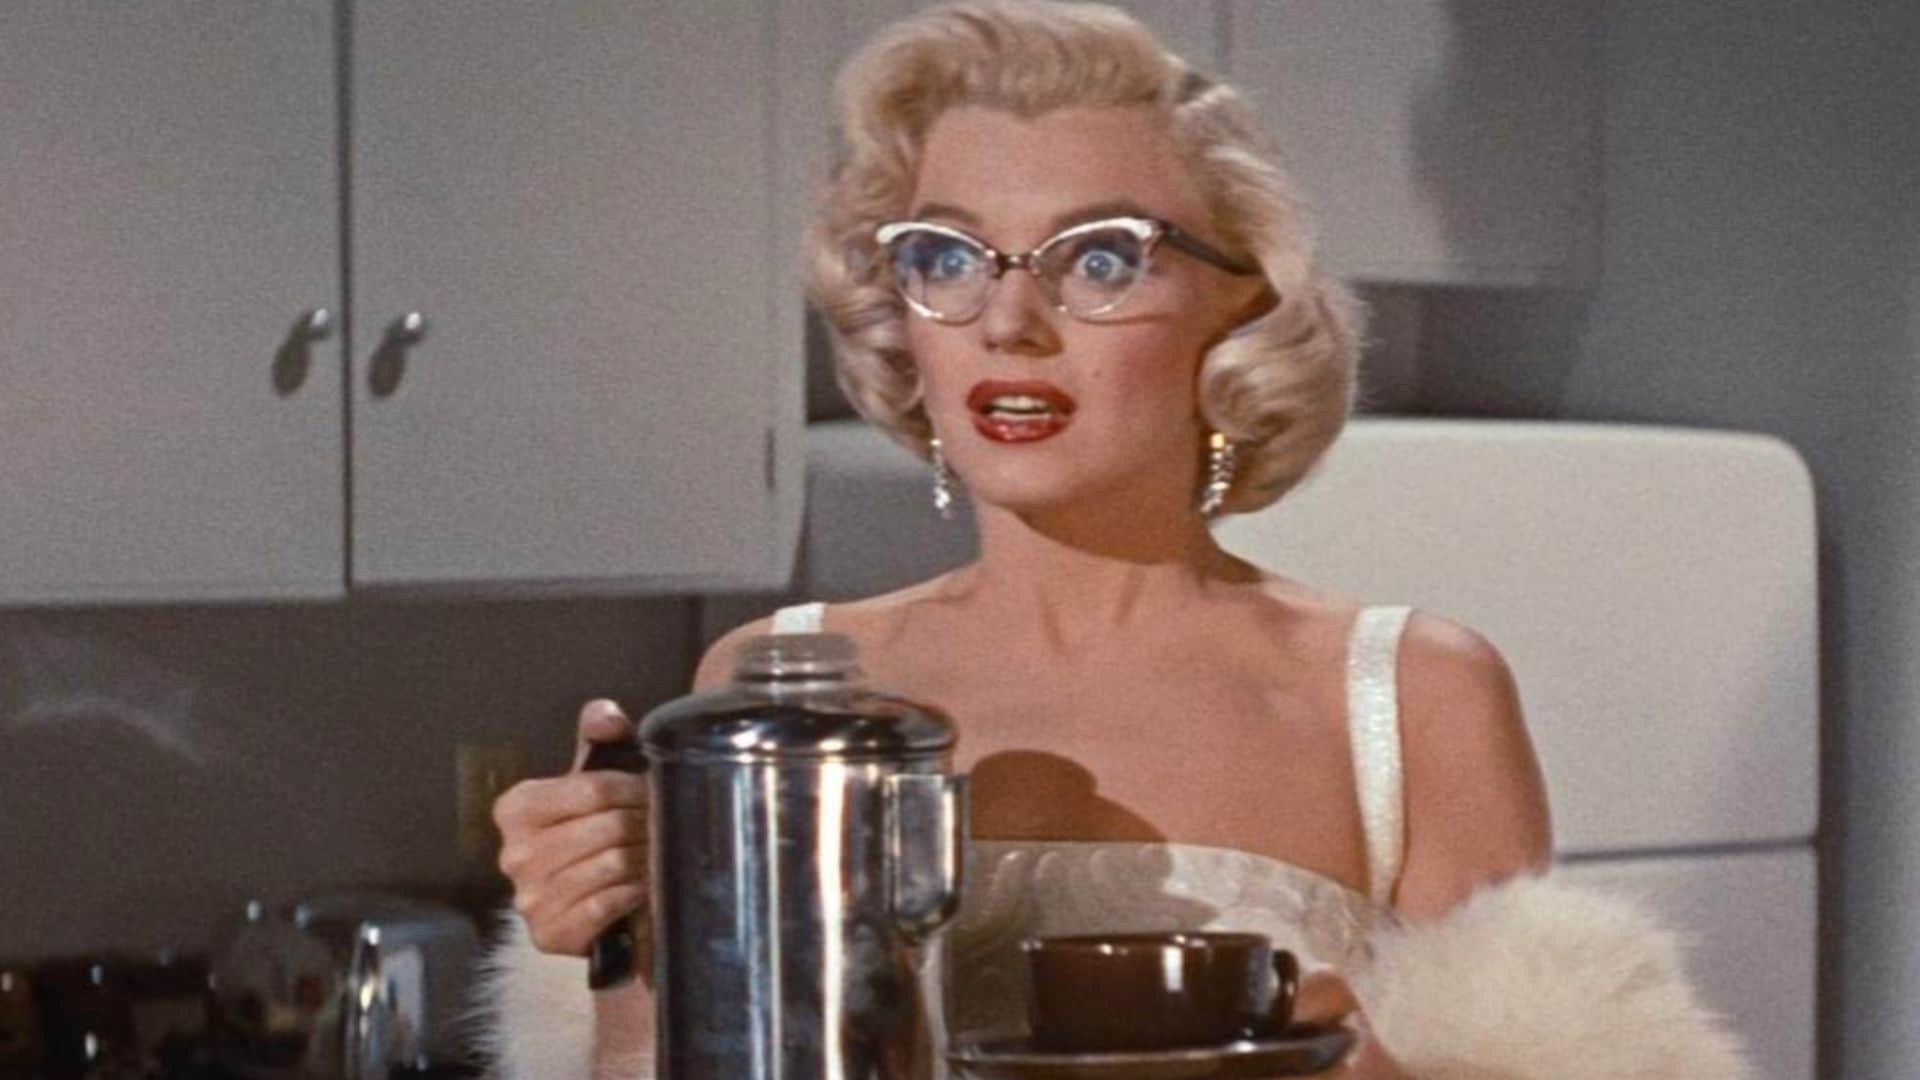 Pola Debevoise holds a mug and a pot of coffee in a kitchen in this image from Twentieth Century Fox